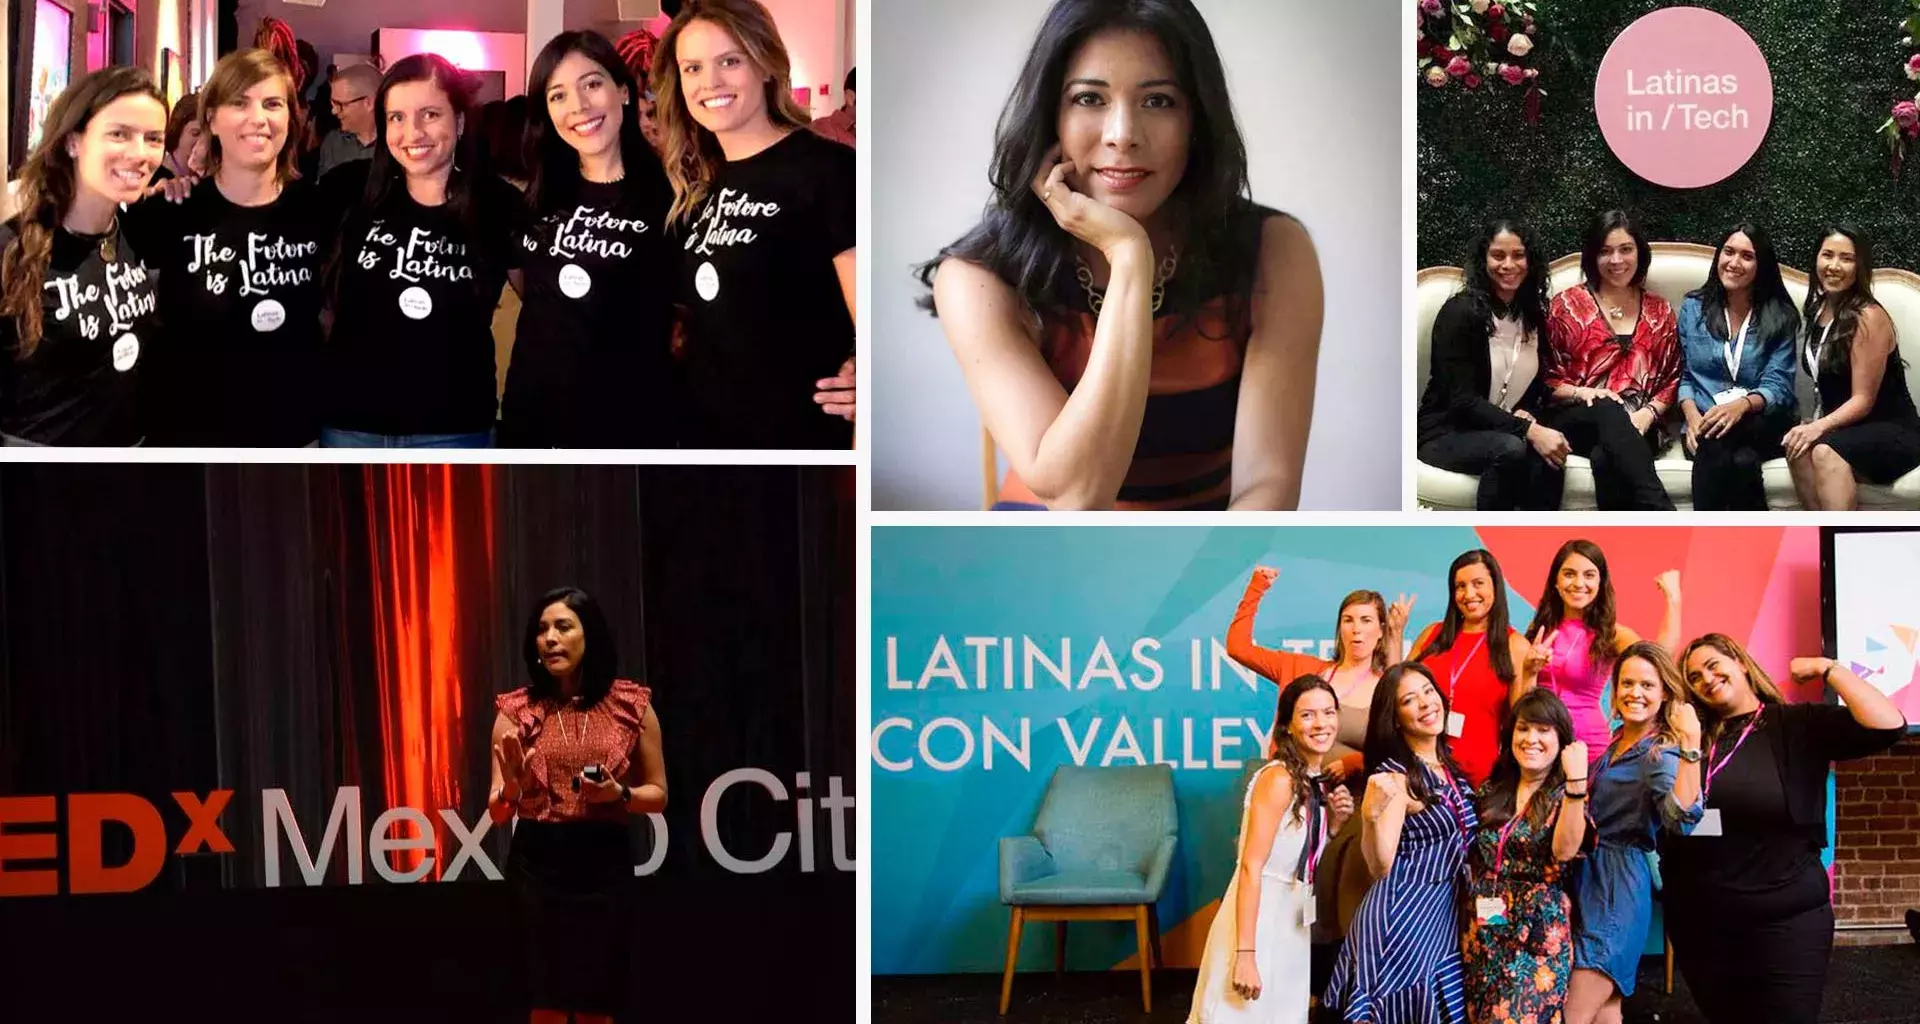 The woman who wants to empower Latin American women in Silicon Valley